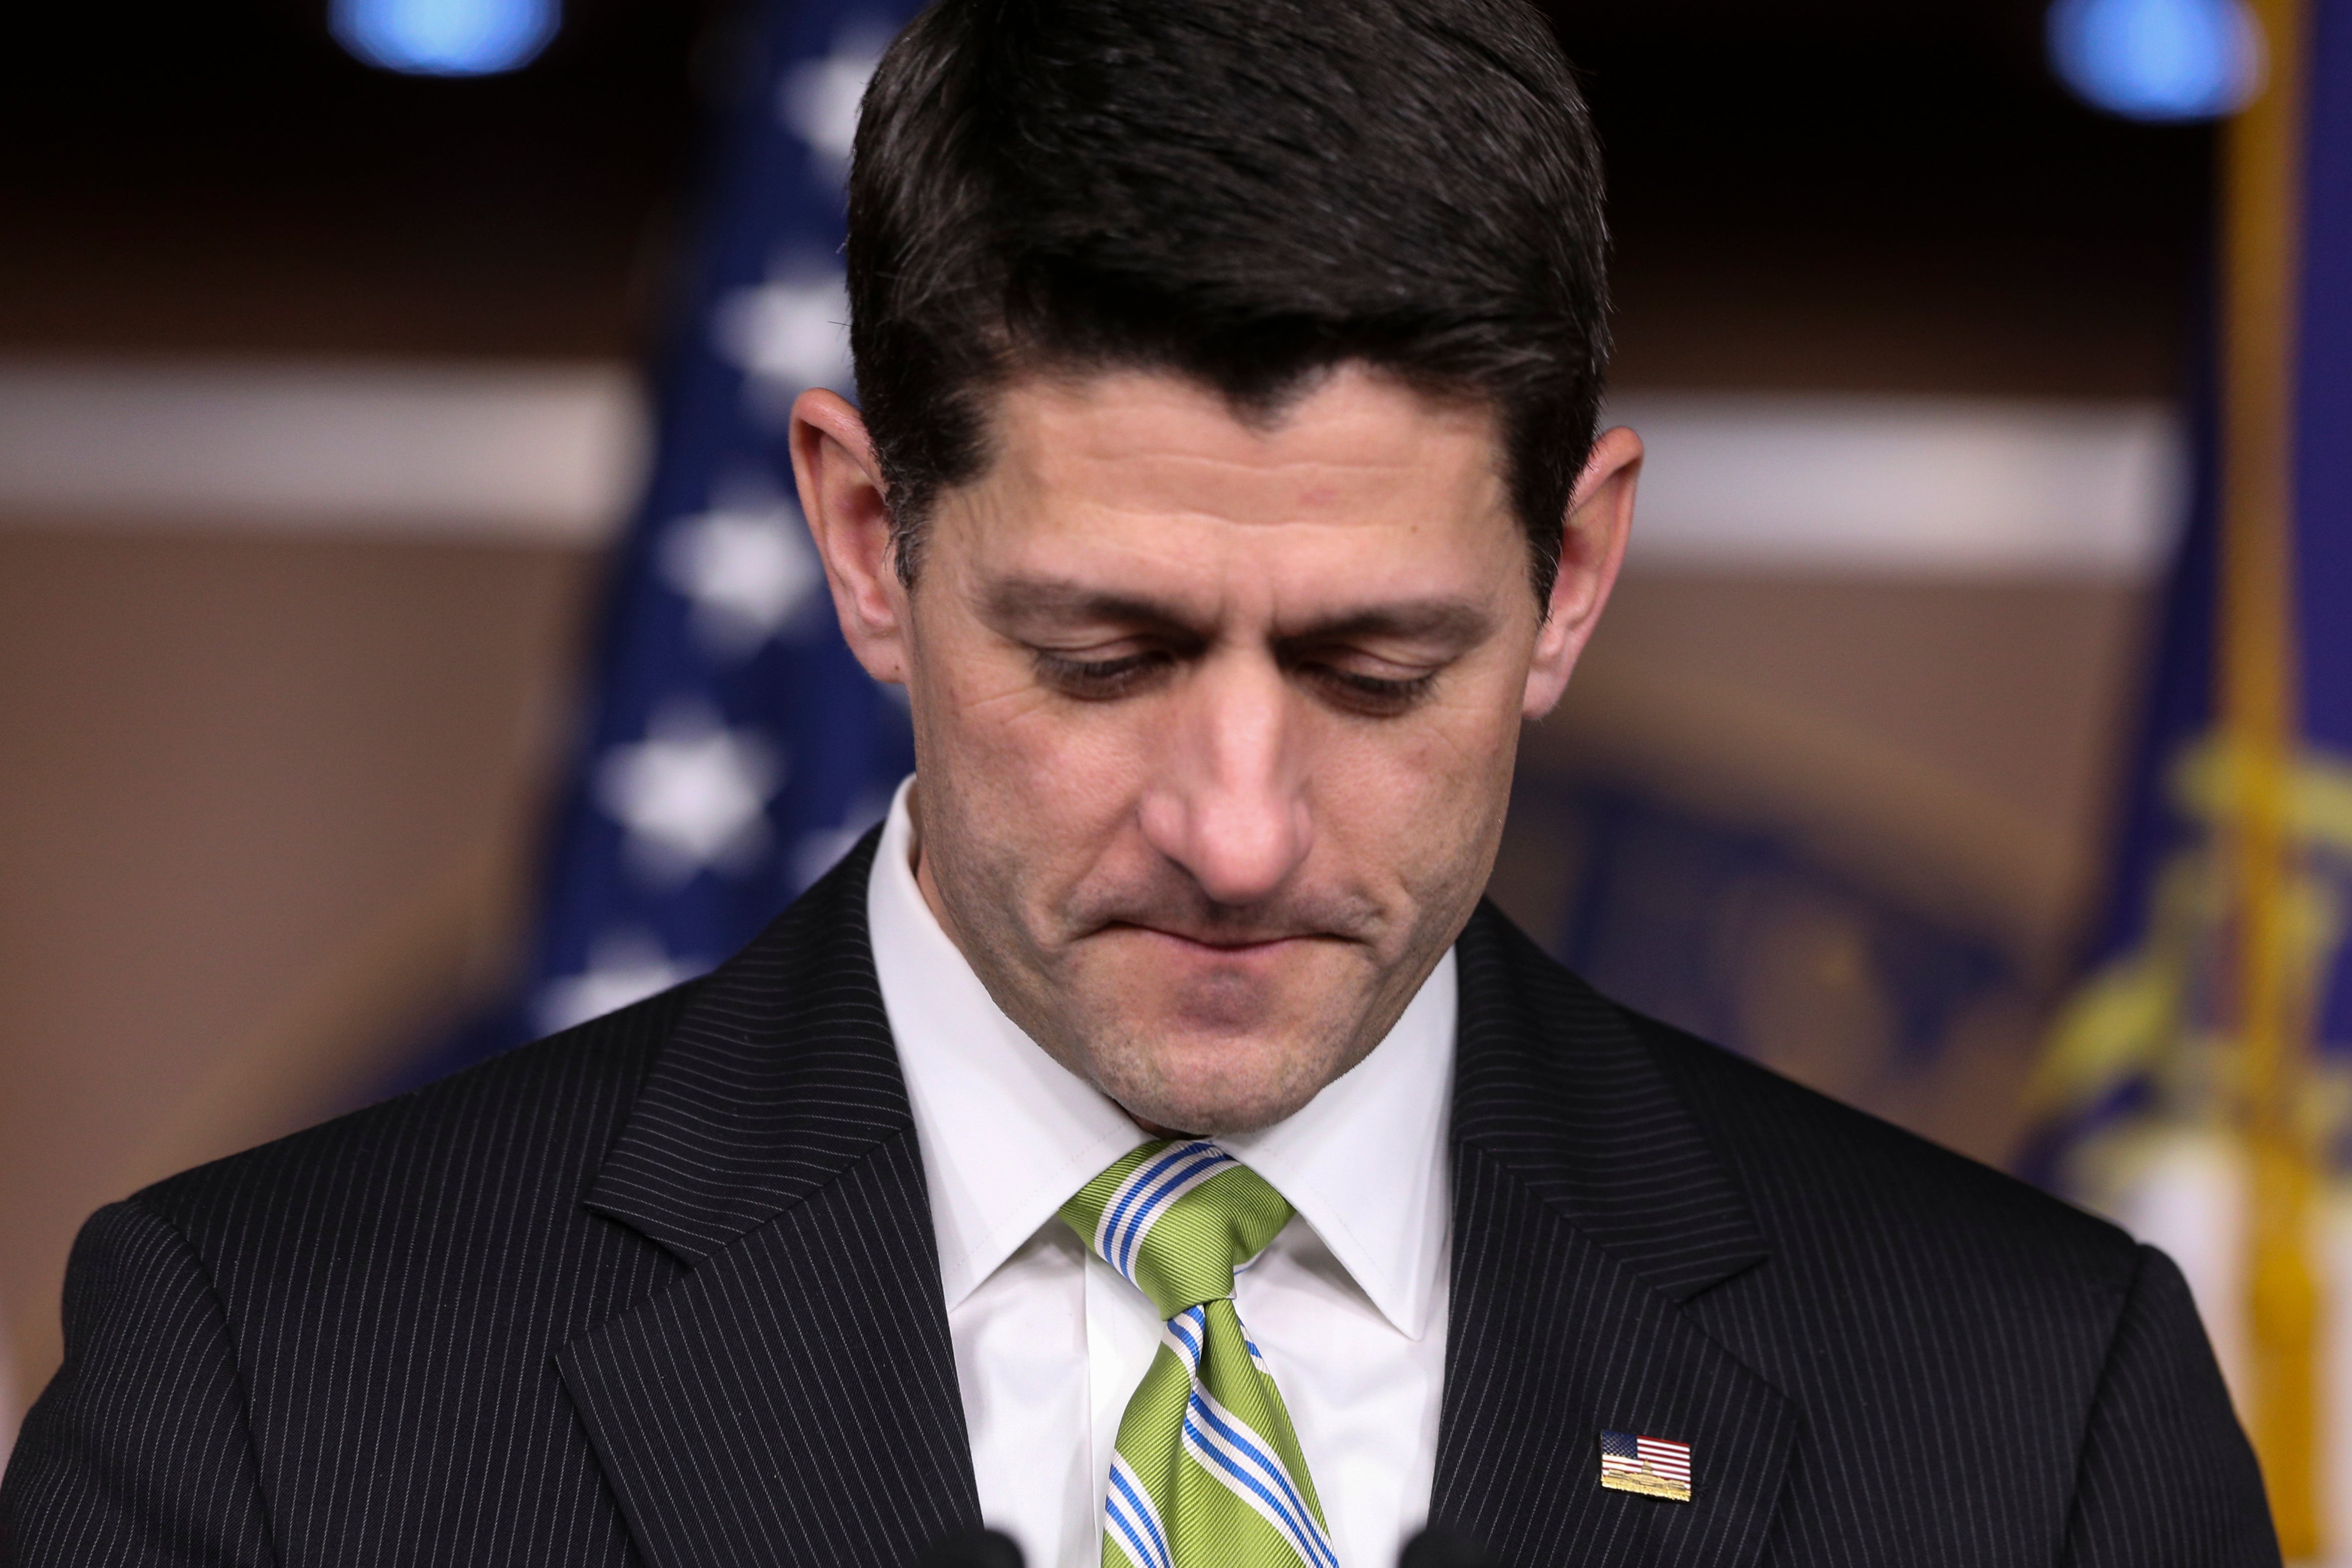 Real Recognize Real: These Woke 8th-Graders Just Shaded Paul Ryan
